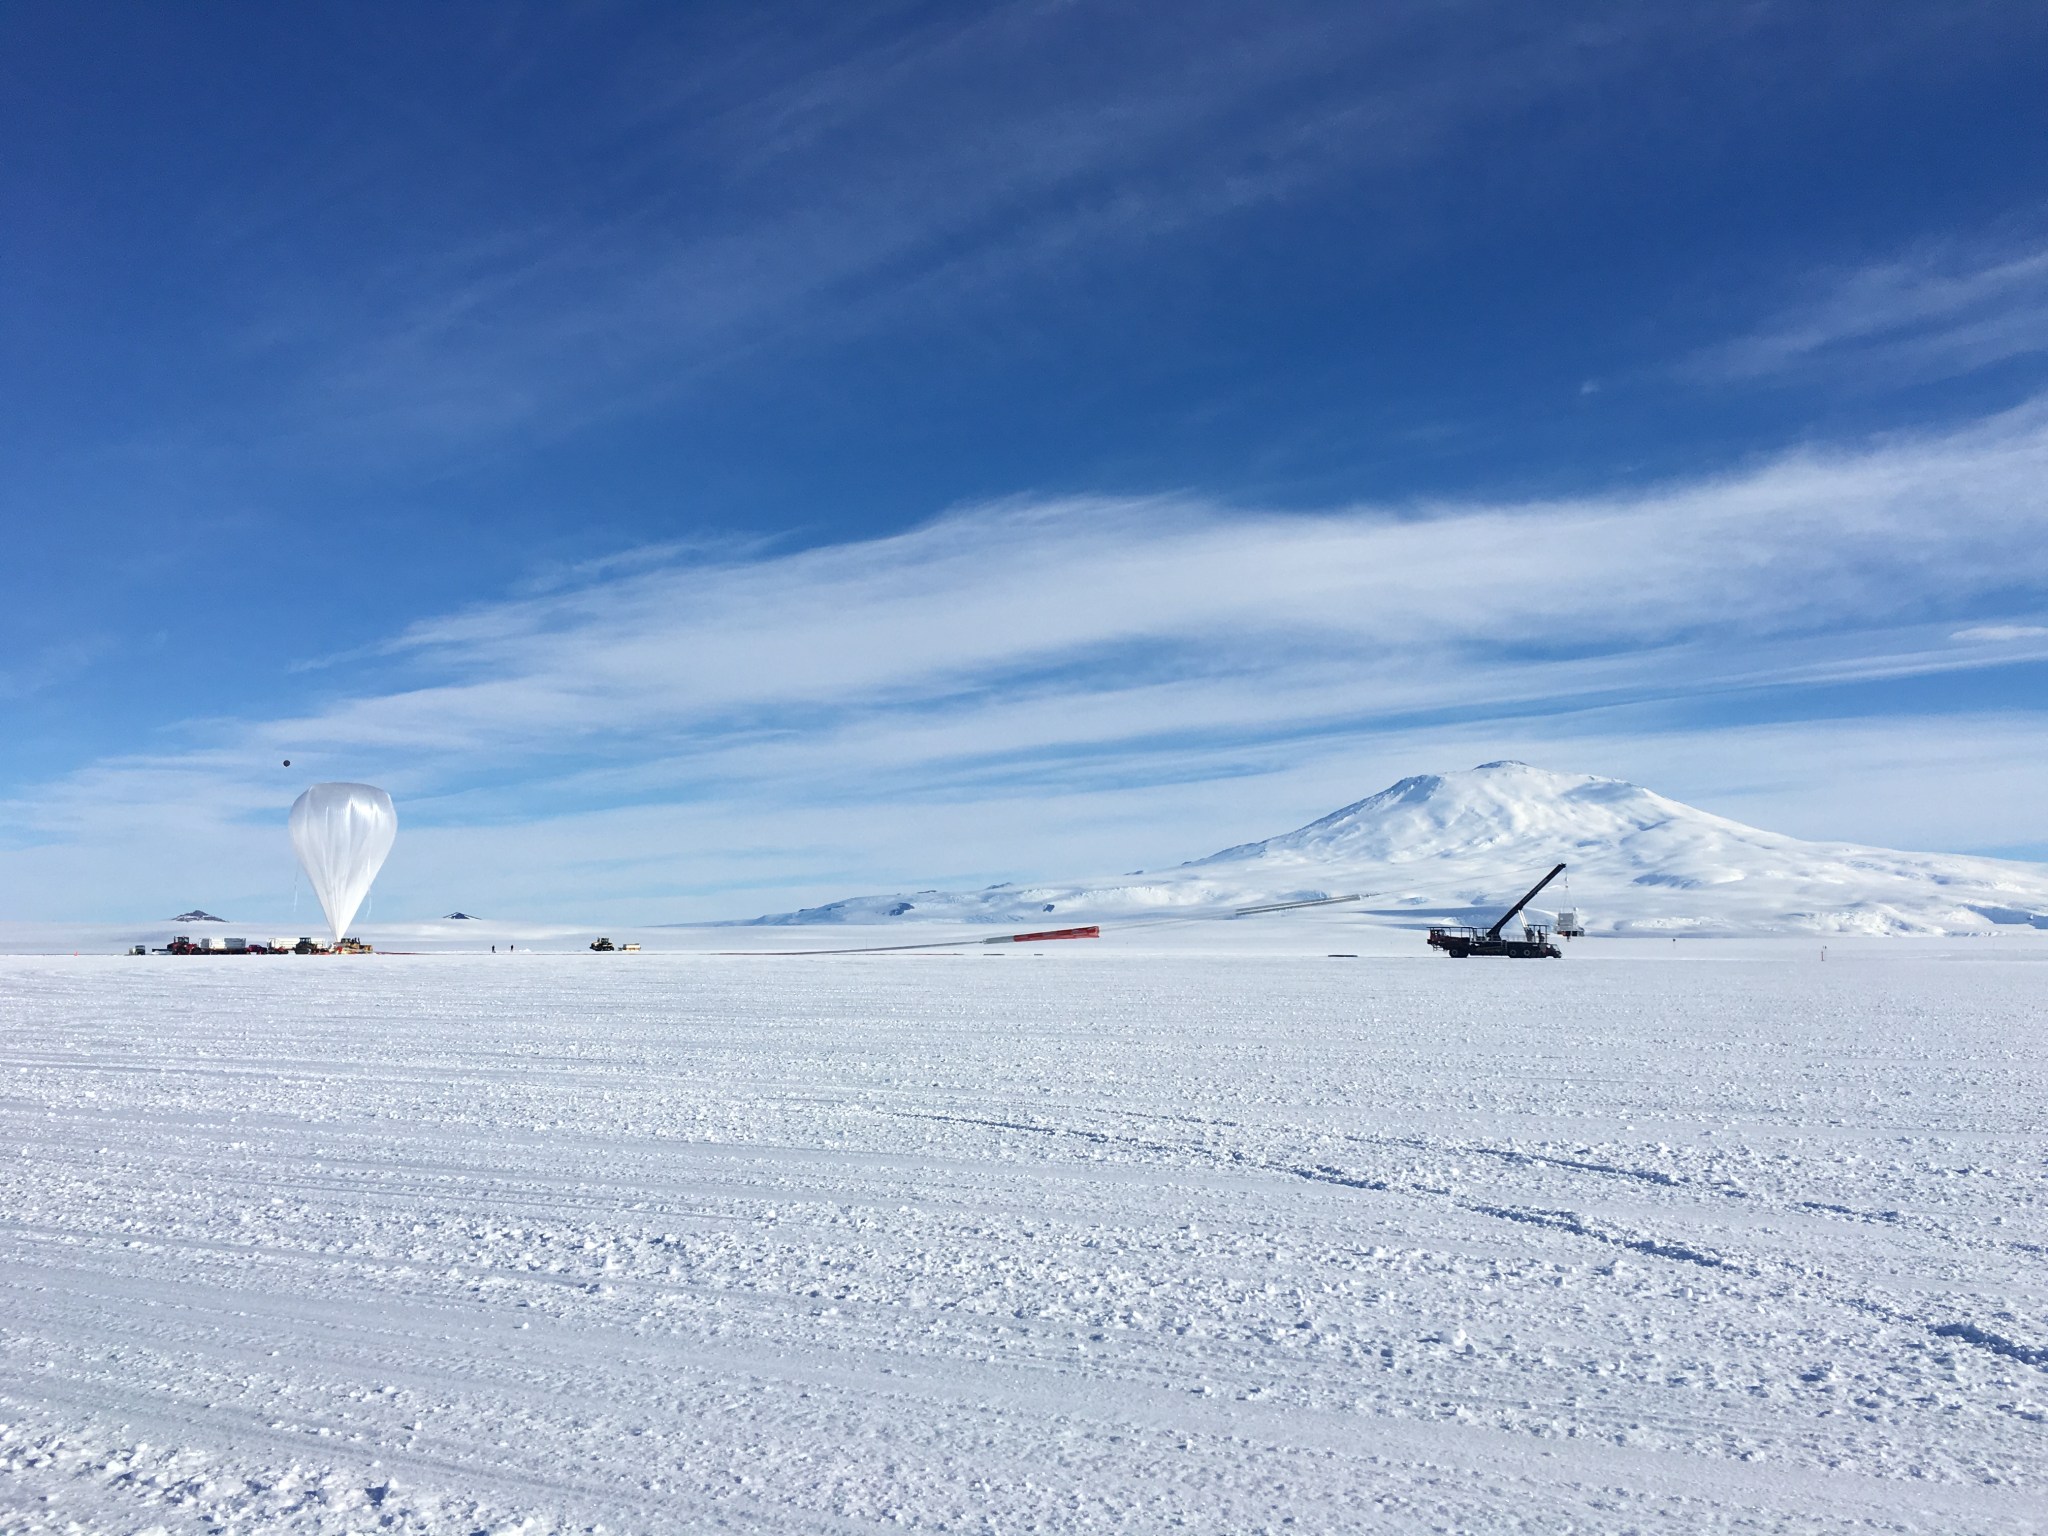 A scientific balloon being prepared for launch on a snowy landscape. The balloon is a clear plastic in the shape of an upside down tear drop. To the right is a large crane holding a square payload. The ground is completely covered in snow, and a snow-covered mountain is seen in the distance. The sky is bright blue with wispy clouds.